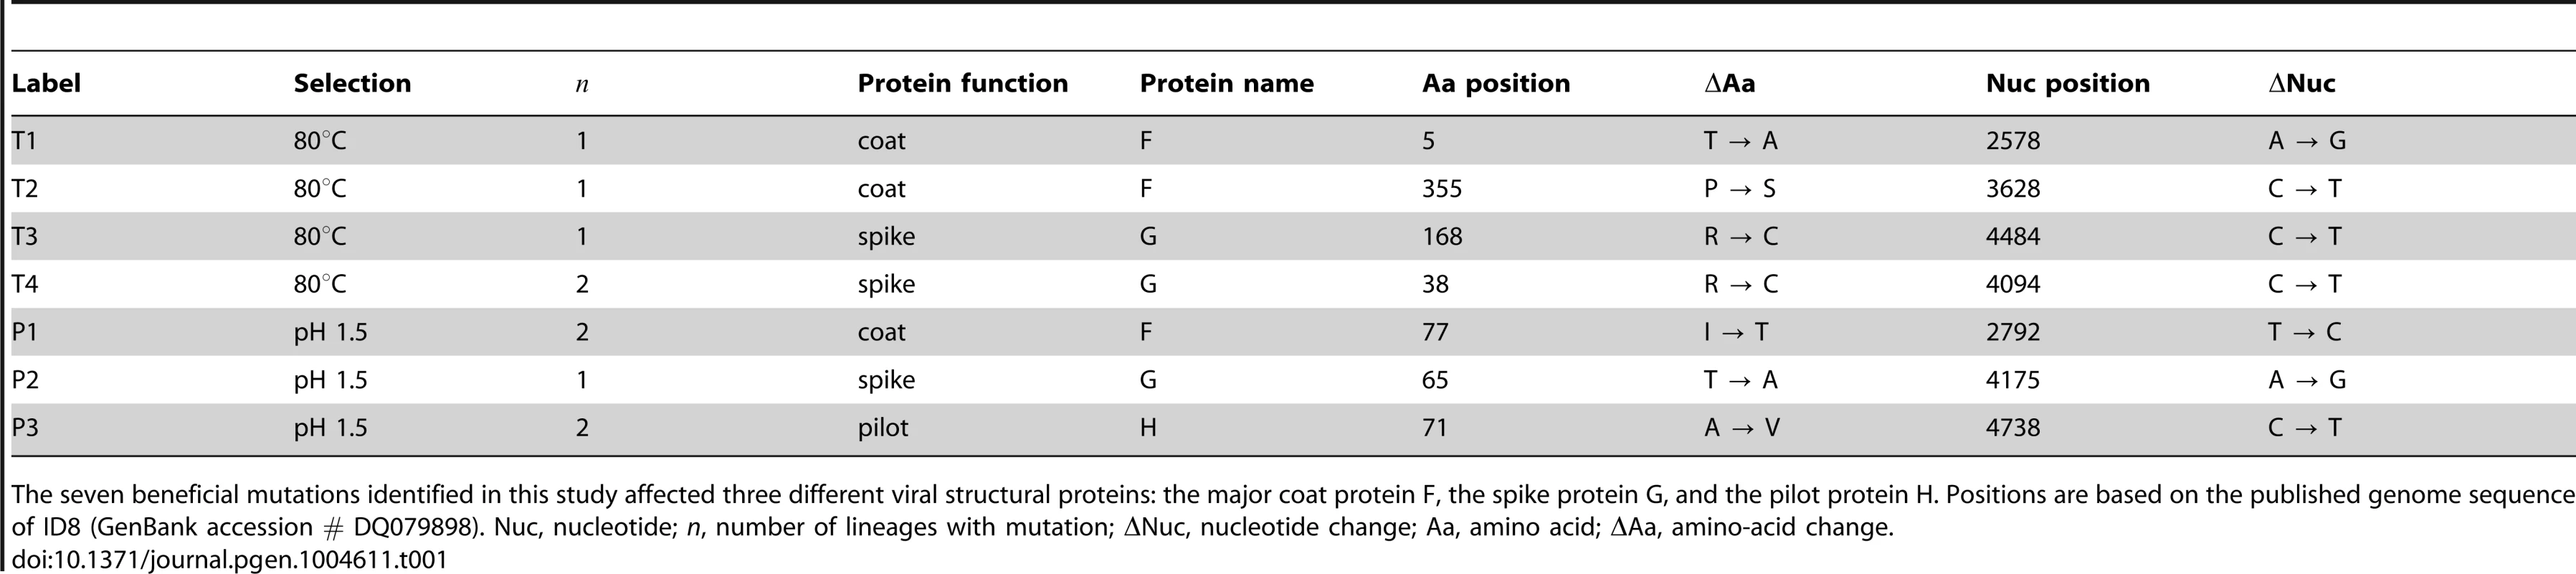 Mutations beneficial to ID8 under two selection regimes.